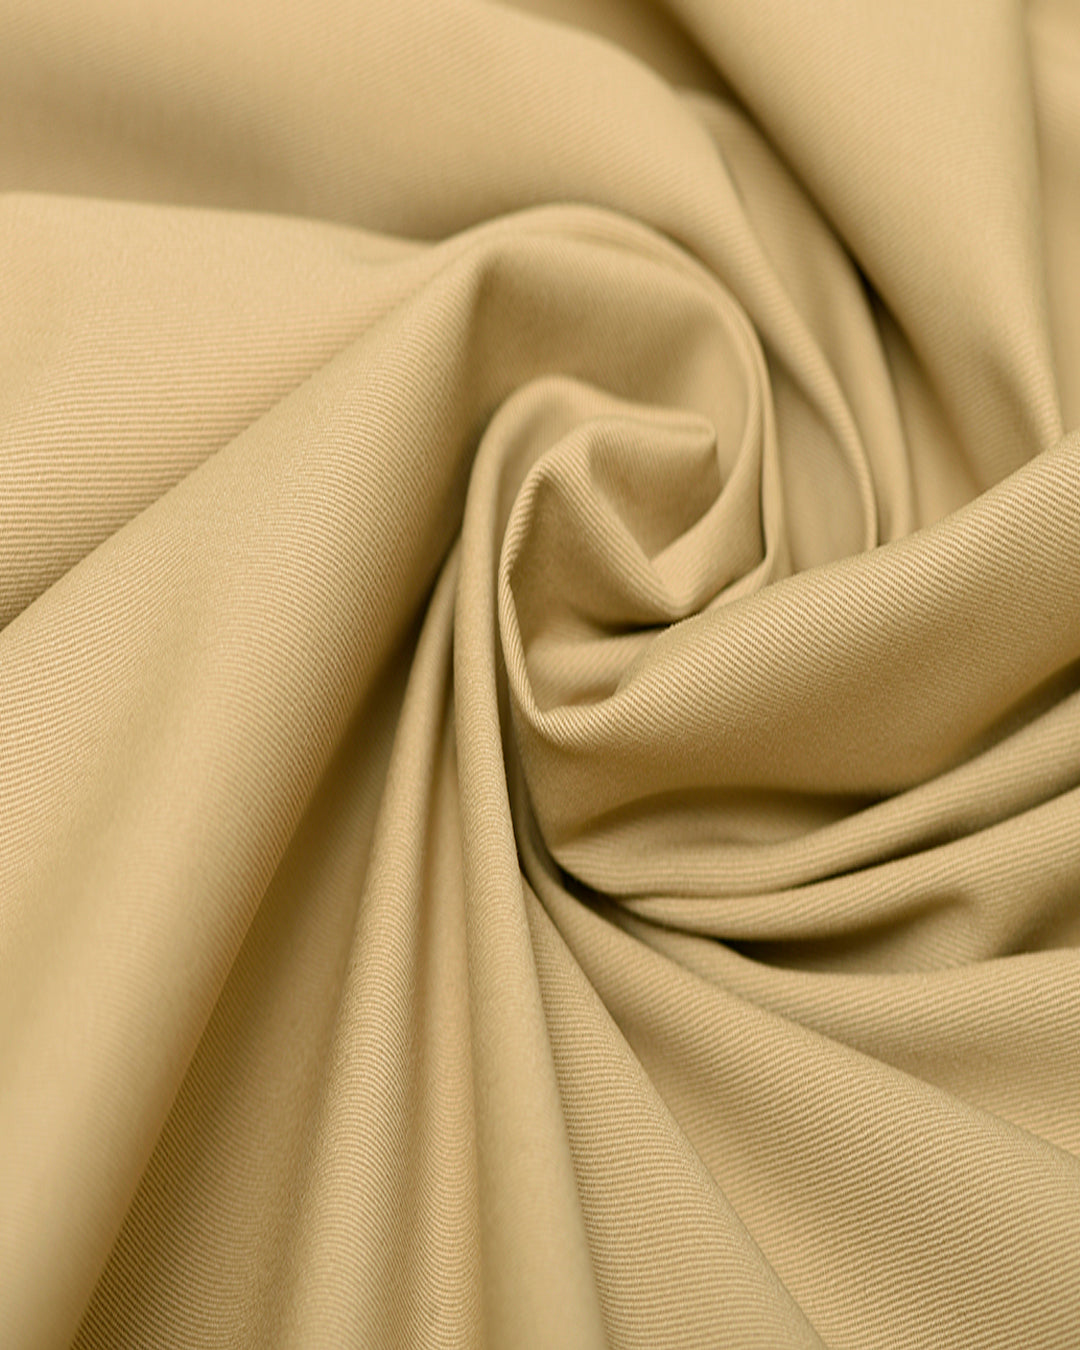 Close up view of custom Genoa Chino pants for men by Luxire in golden corn